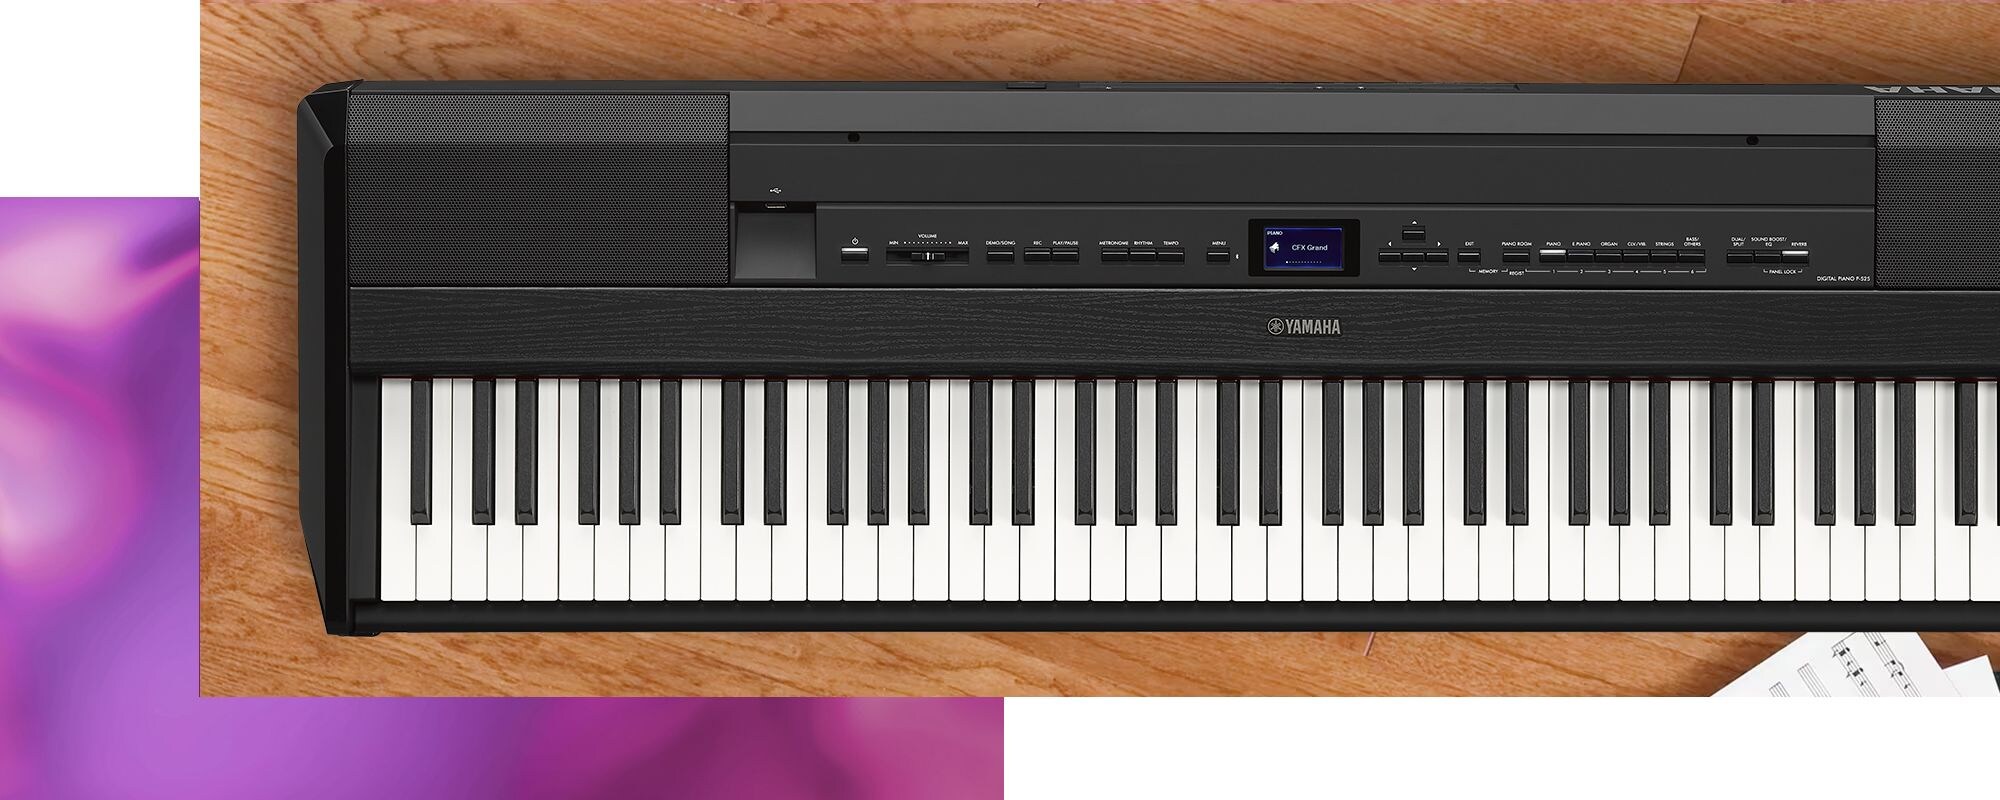 P Series Latin / - - Yamaha Middle CIS - Products East Oceania Asia / Africa Musical - Pianos / / Instruments - America 